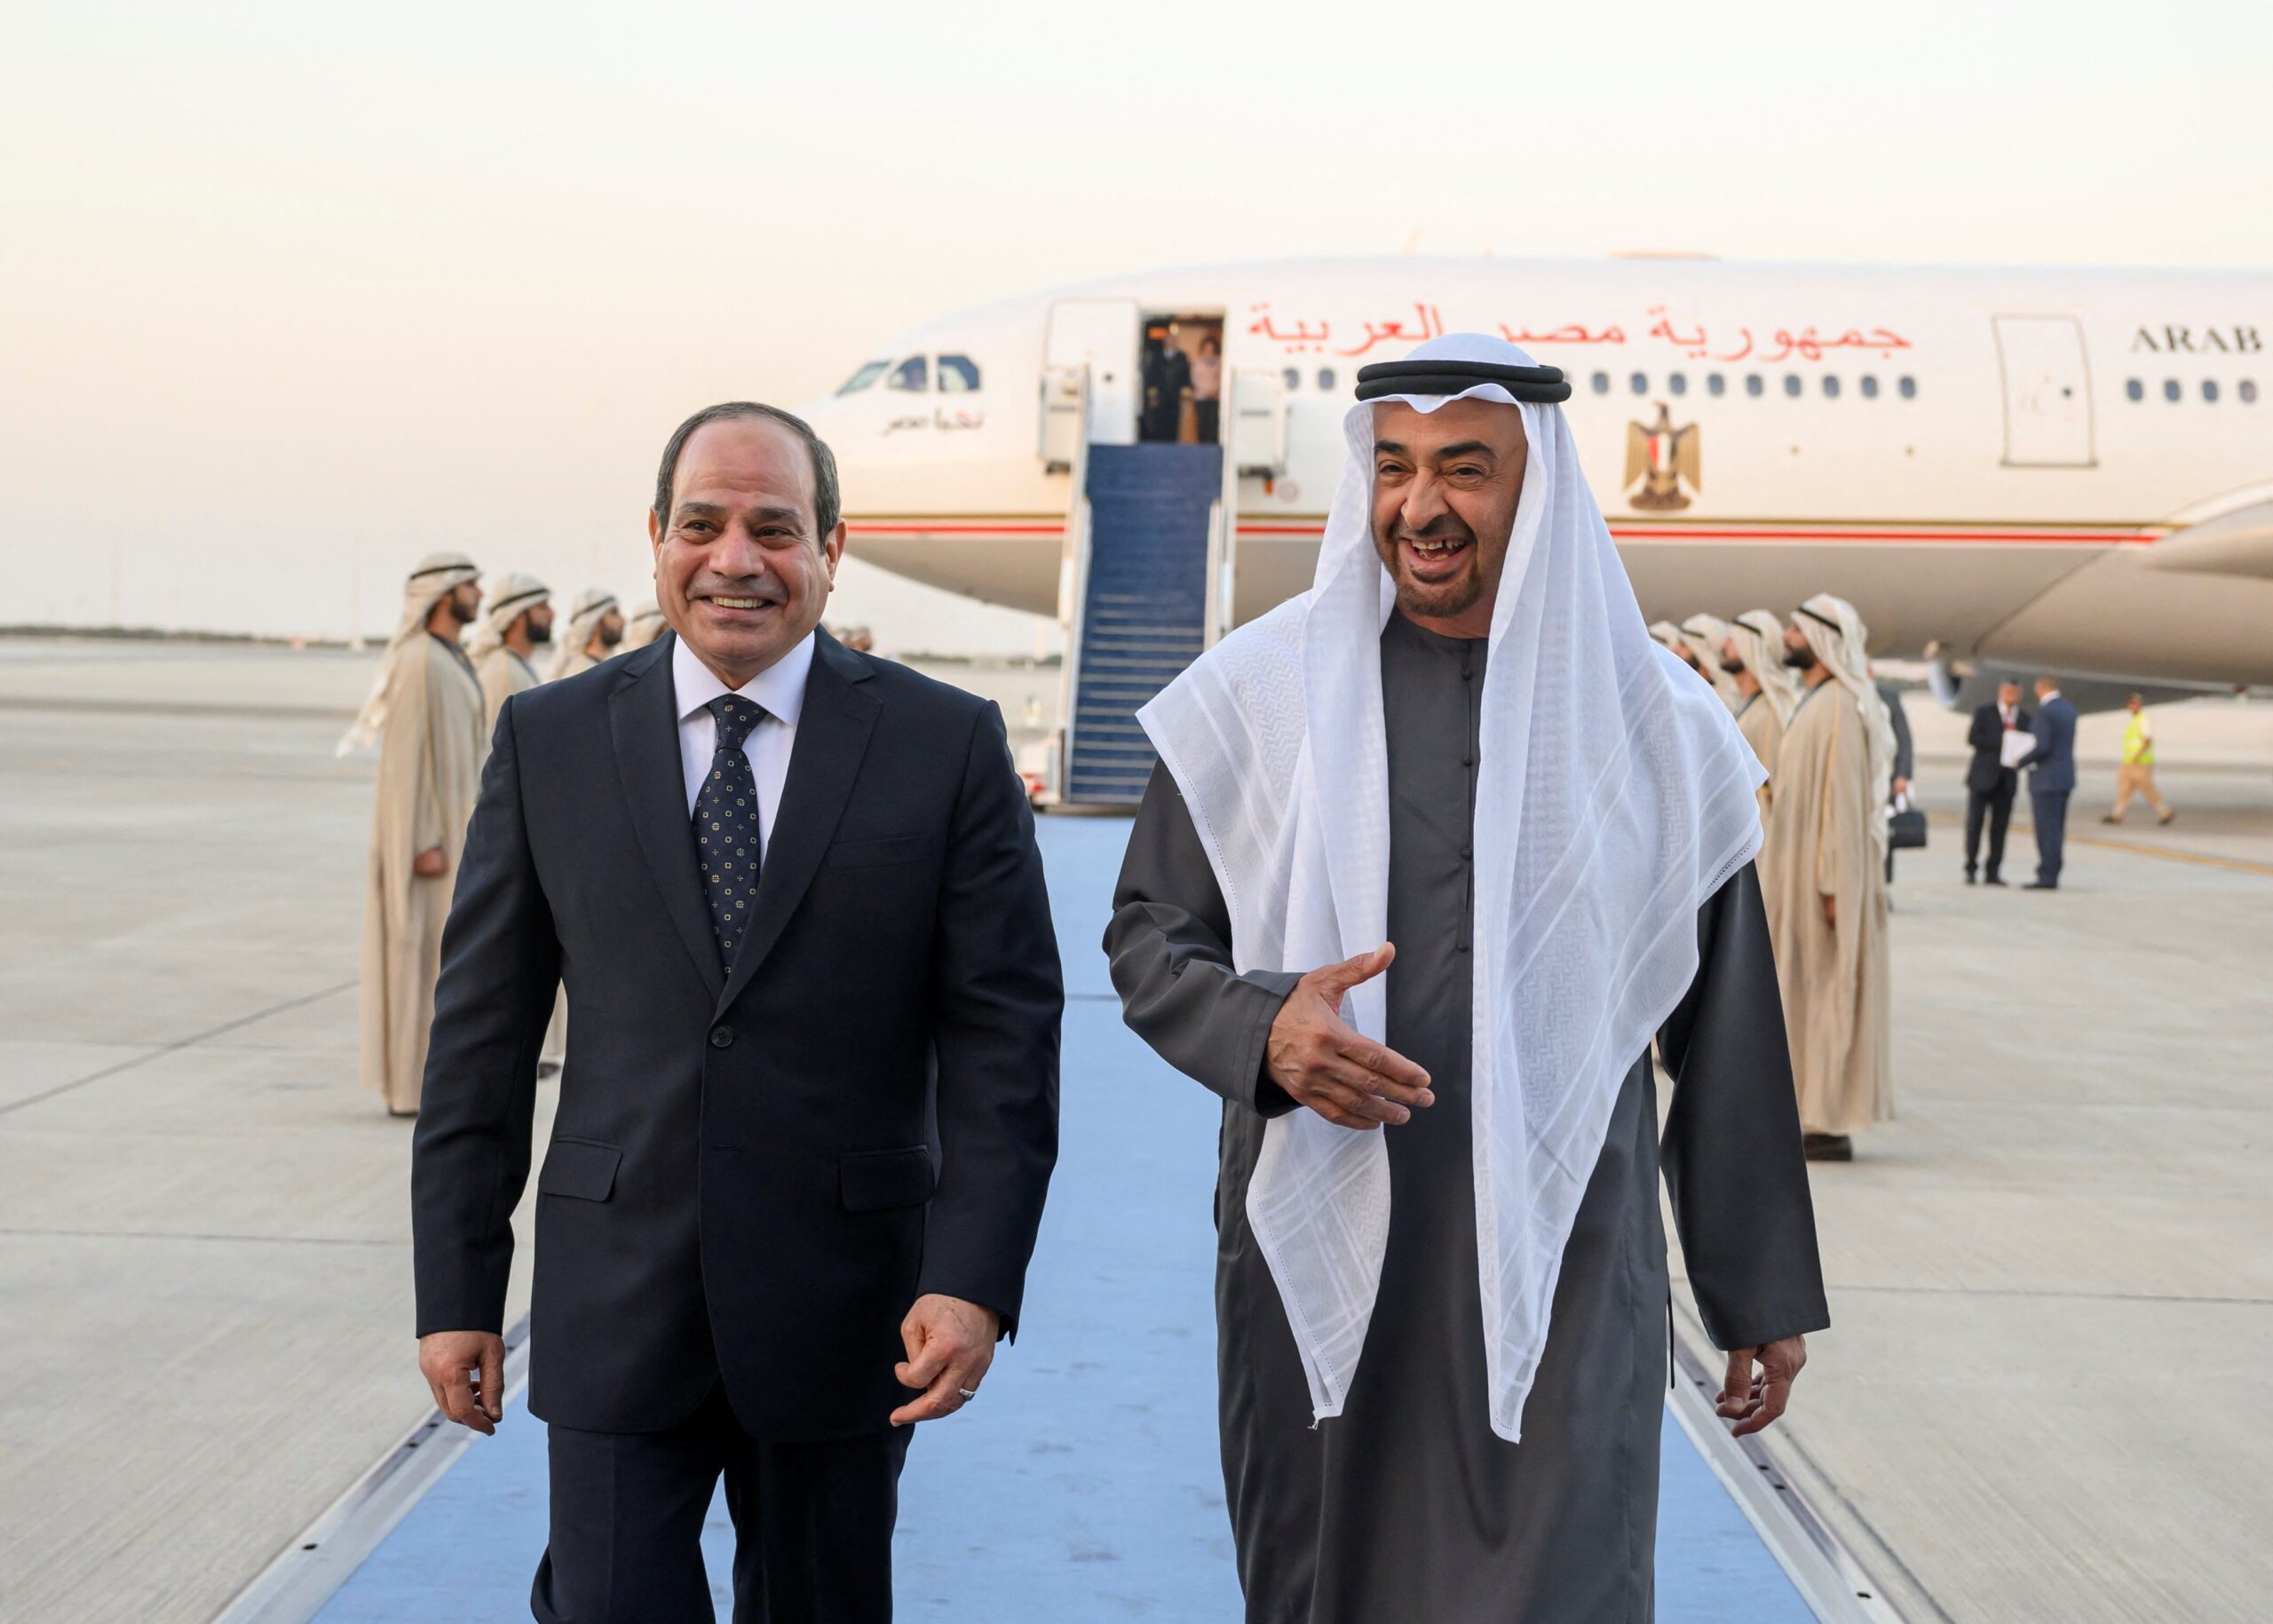 The presidents of Egypt and the UAE, Abdel Fattah El Sisi and Sheikh Mohamed bin Zayed Al Nahyan